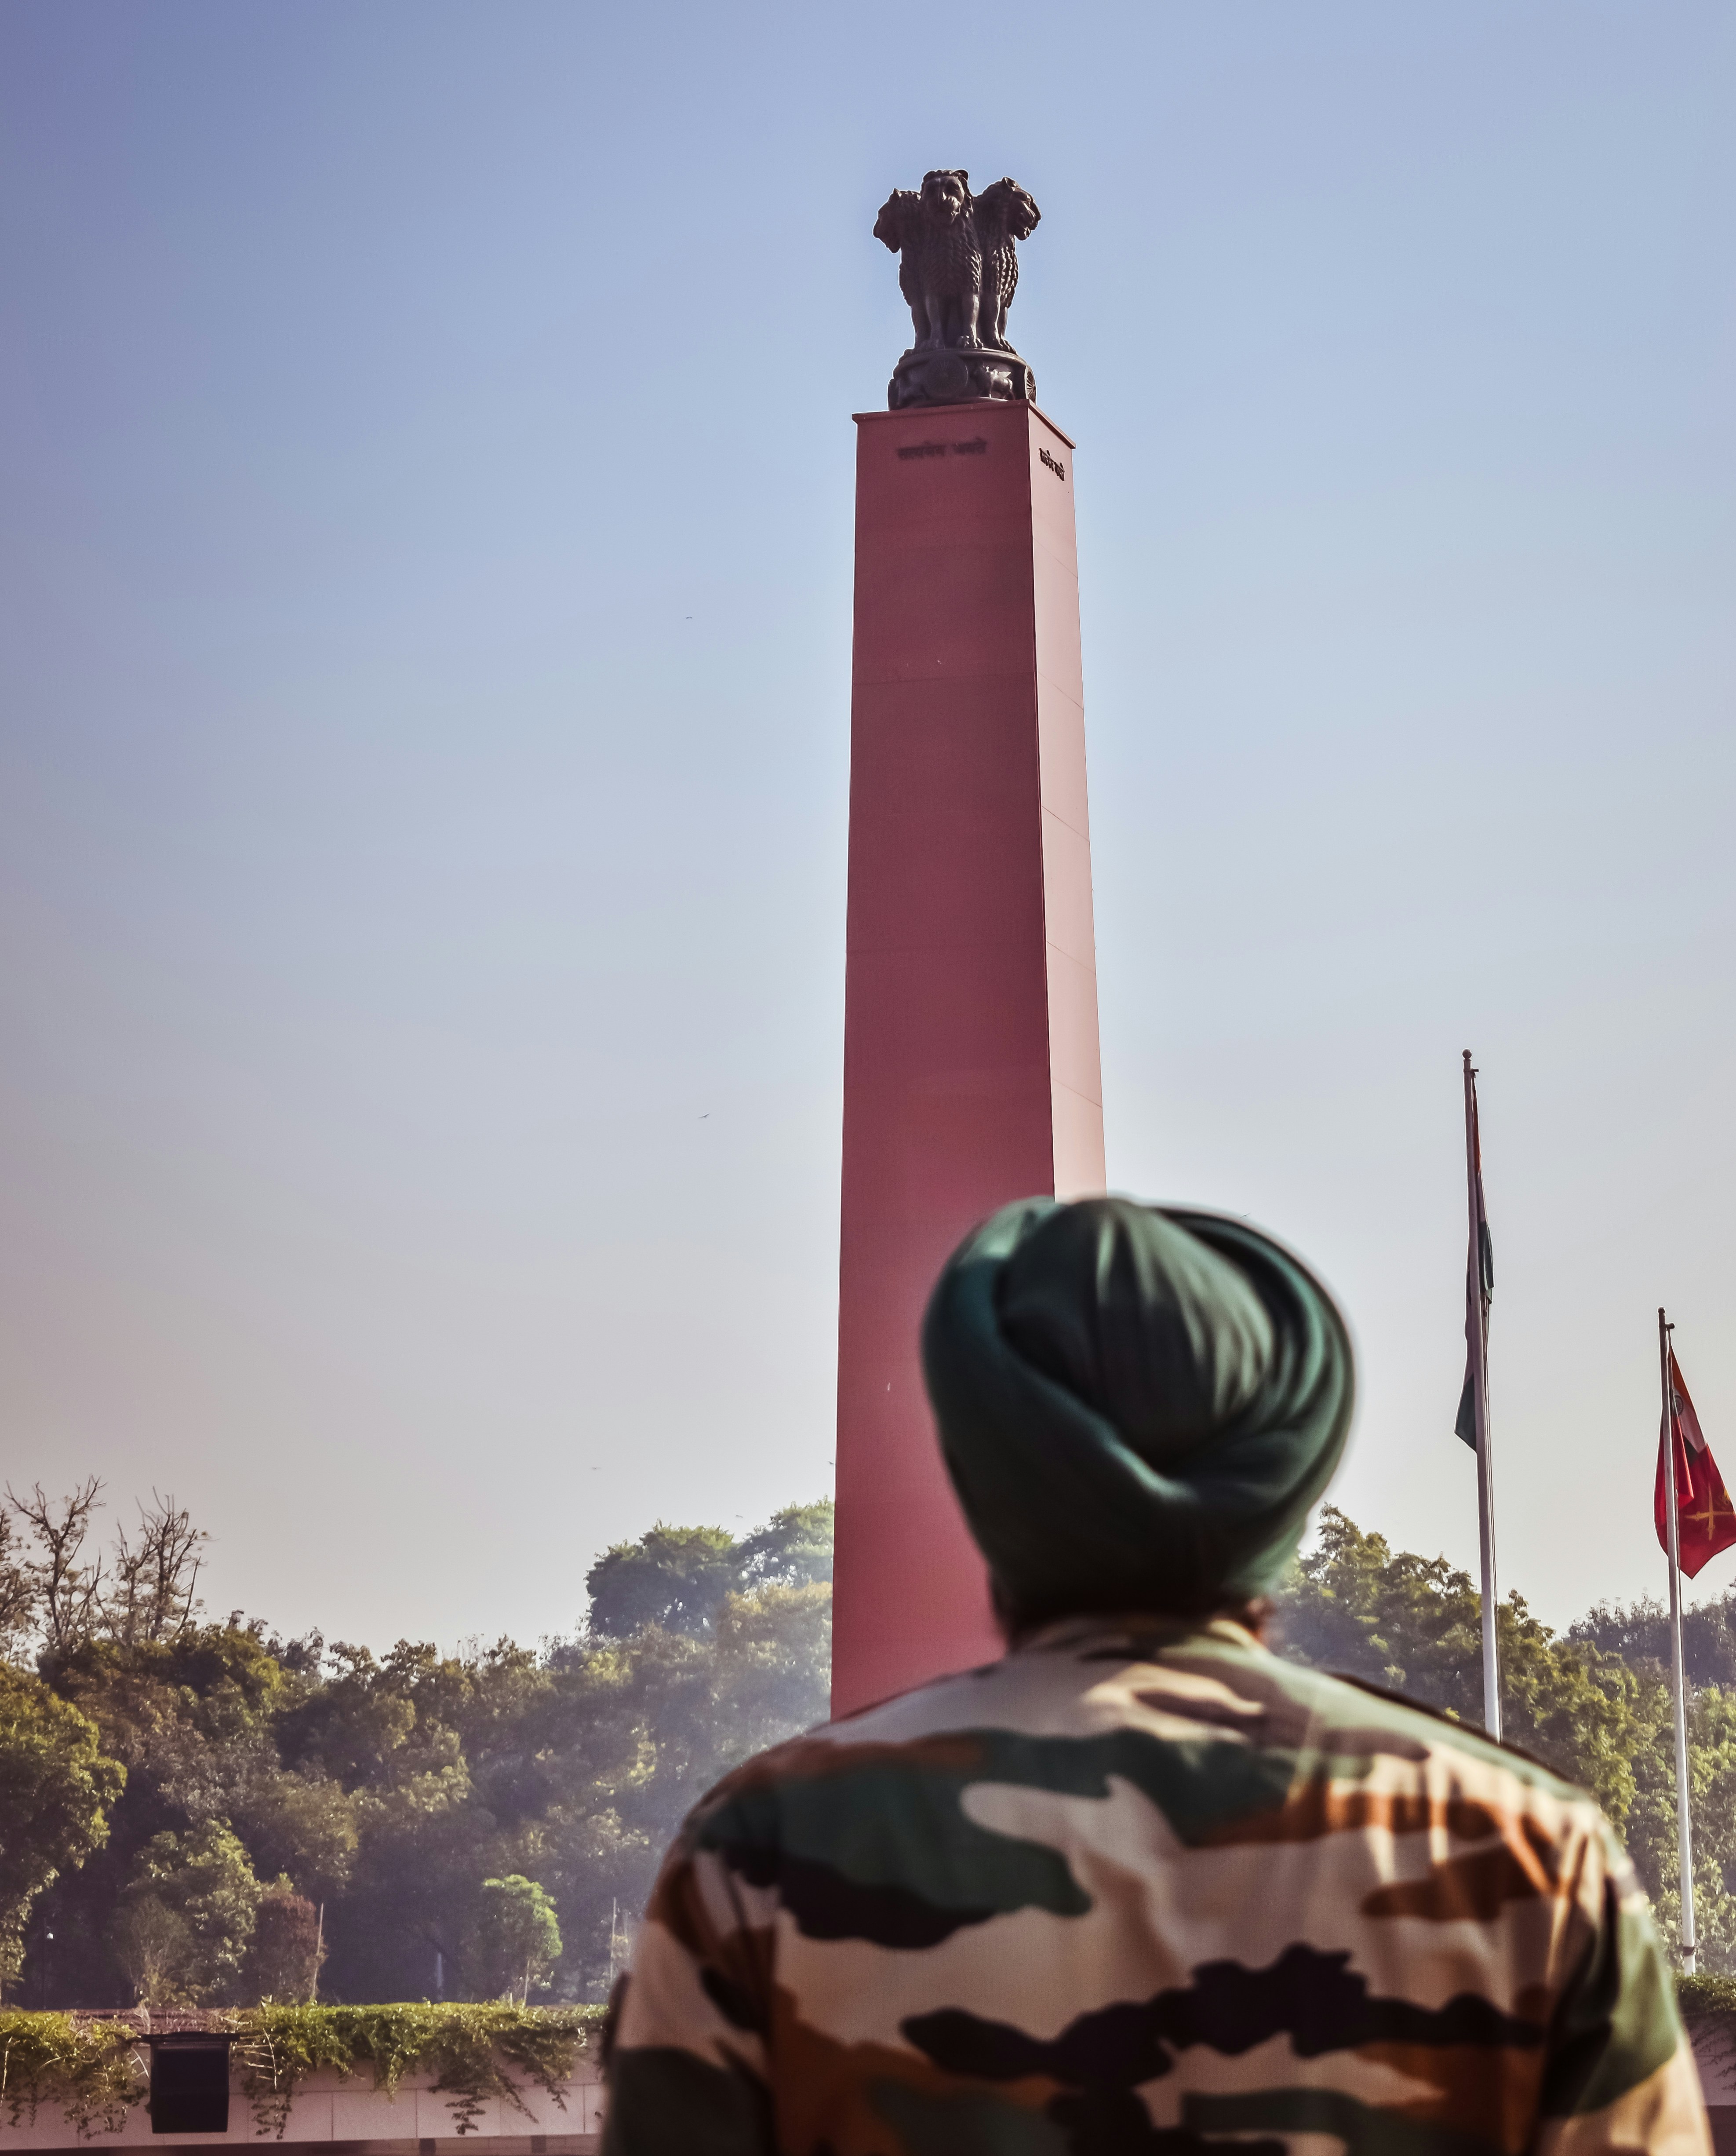 The National War Memorial is a monument built by the Government of India near India Gate, New Delhi